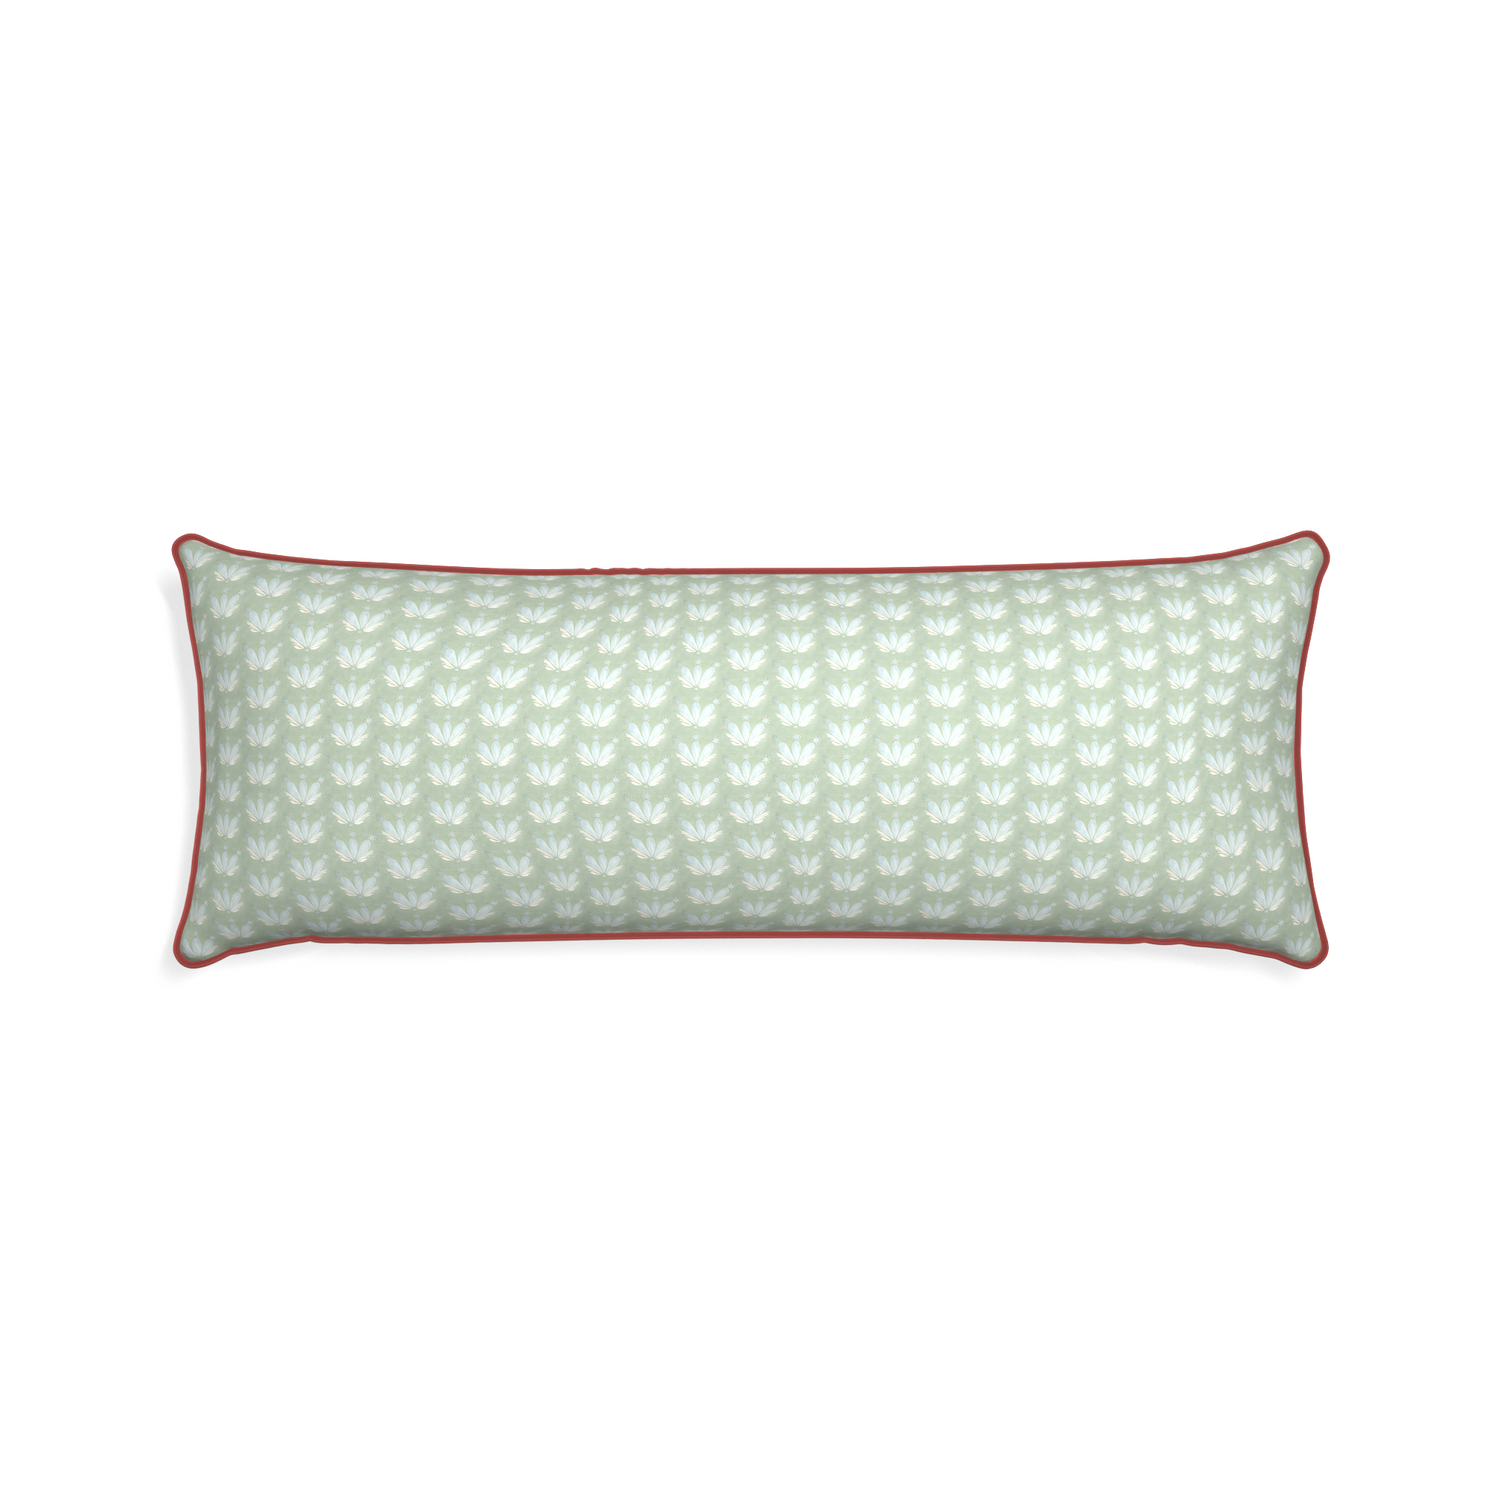 Xl-lumbar serena sea salt custom pillow with c piping on white background